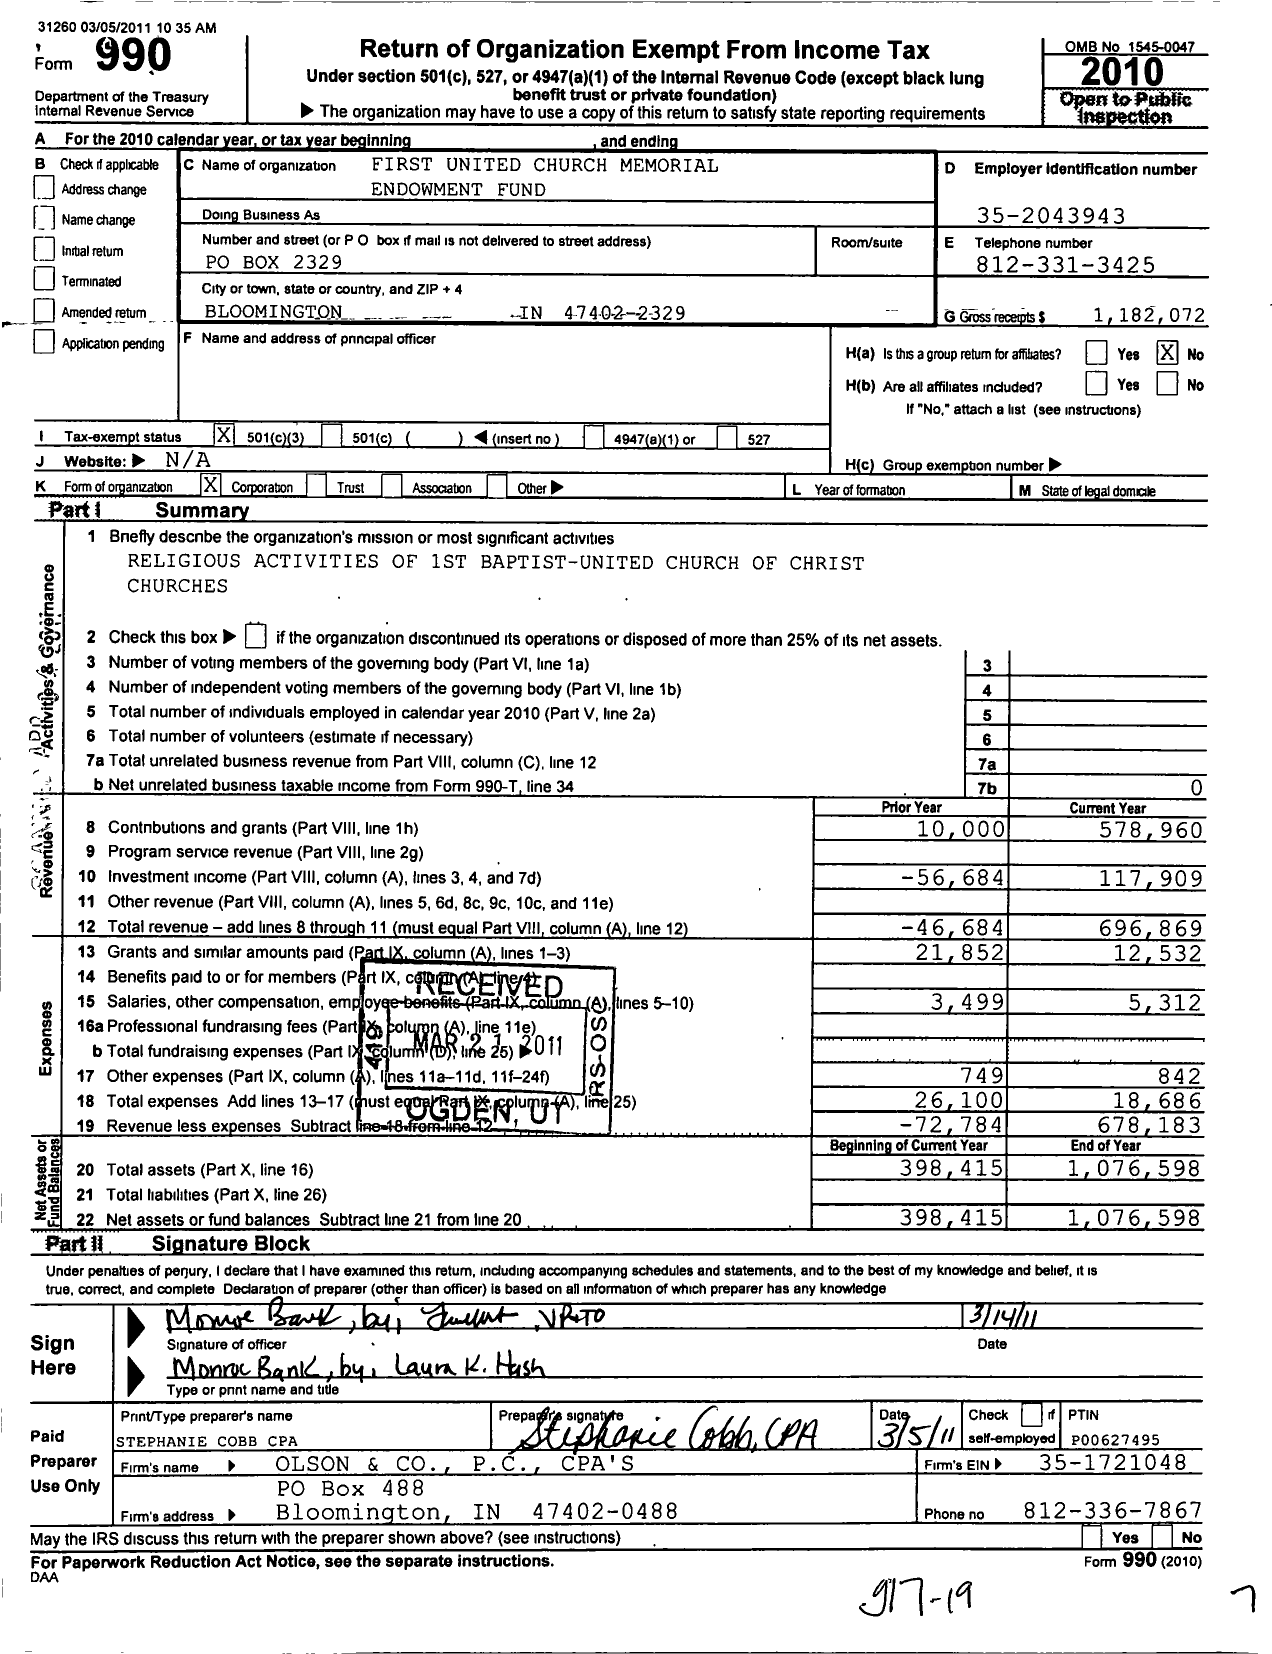 Image of first page of 2010 Form 990 for First United Church Memorial Endowment Fund